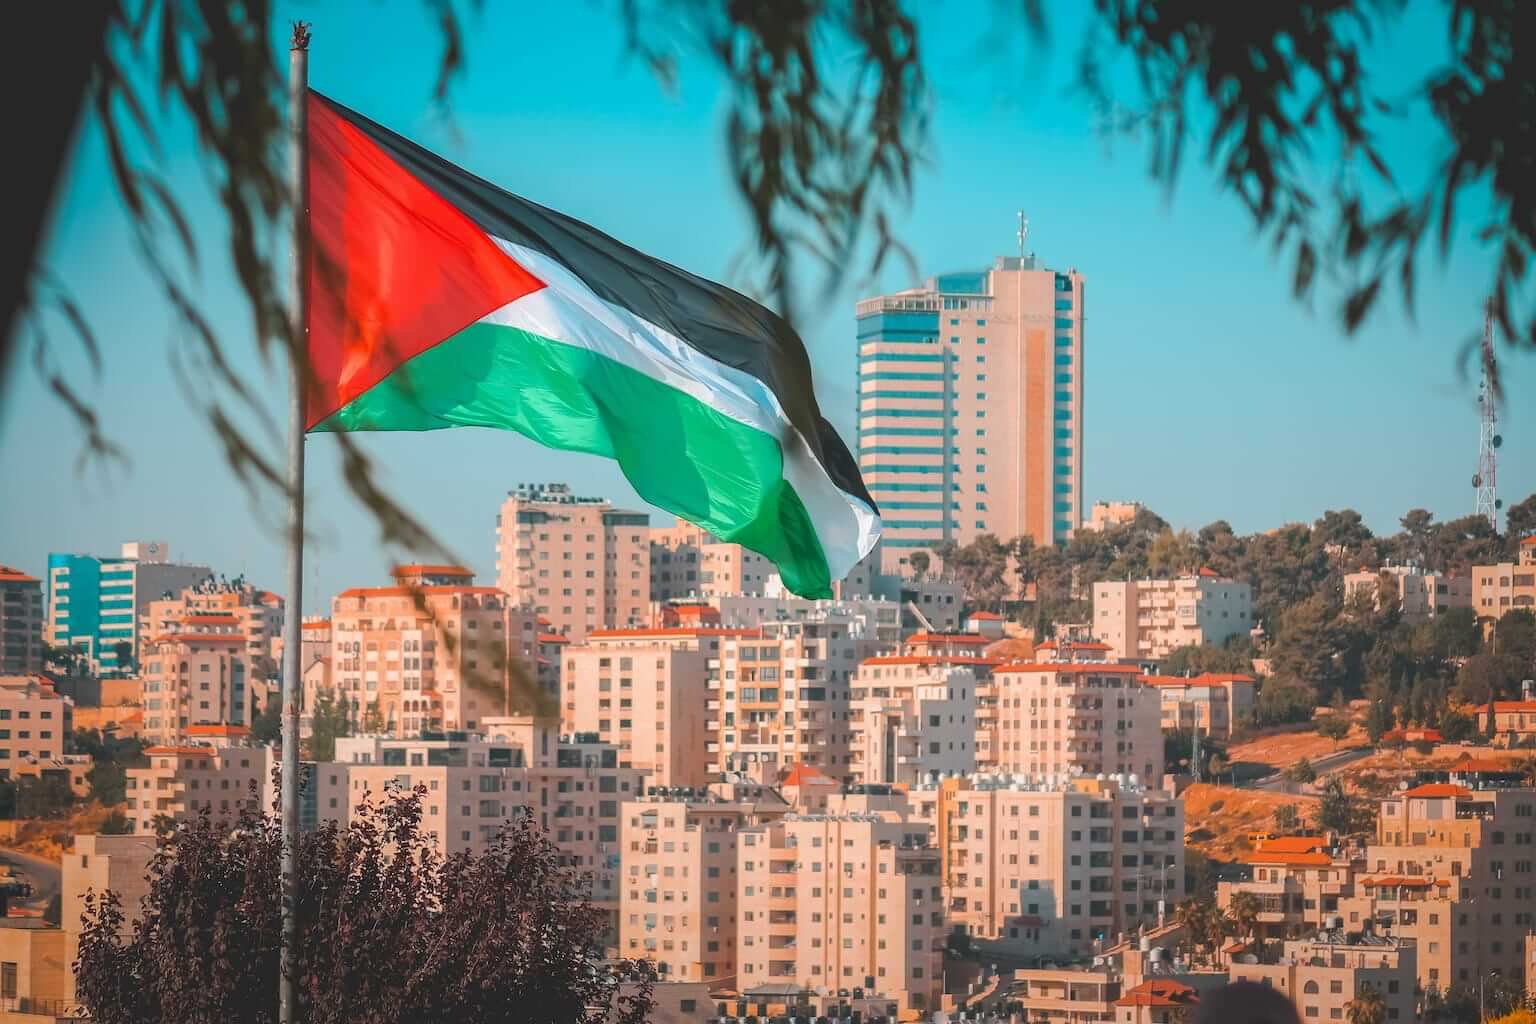 The Palestinian flag flies in front of the West Bank city of Ramallah. By nayefhammouri/stock.adobe.com. How was Palestine formed?